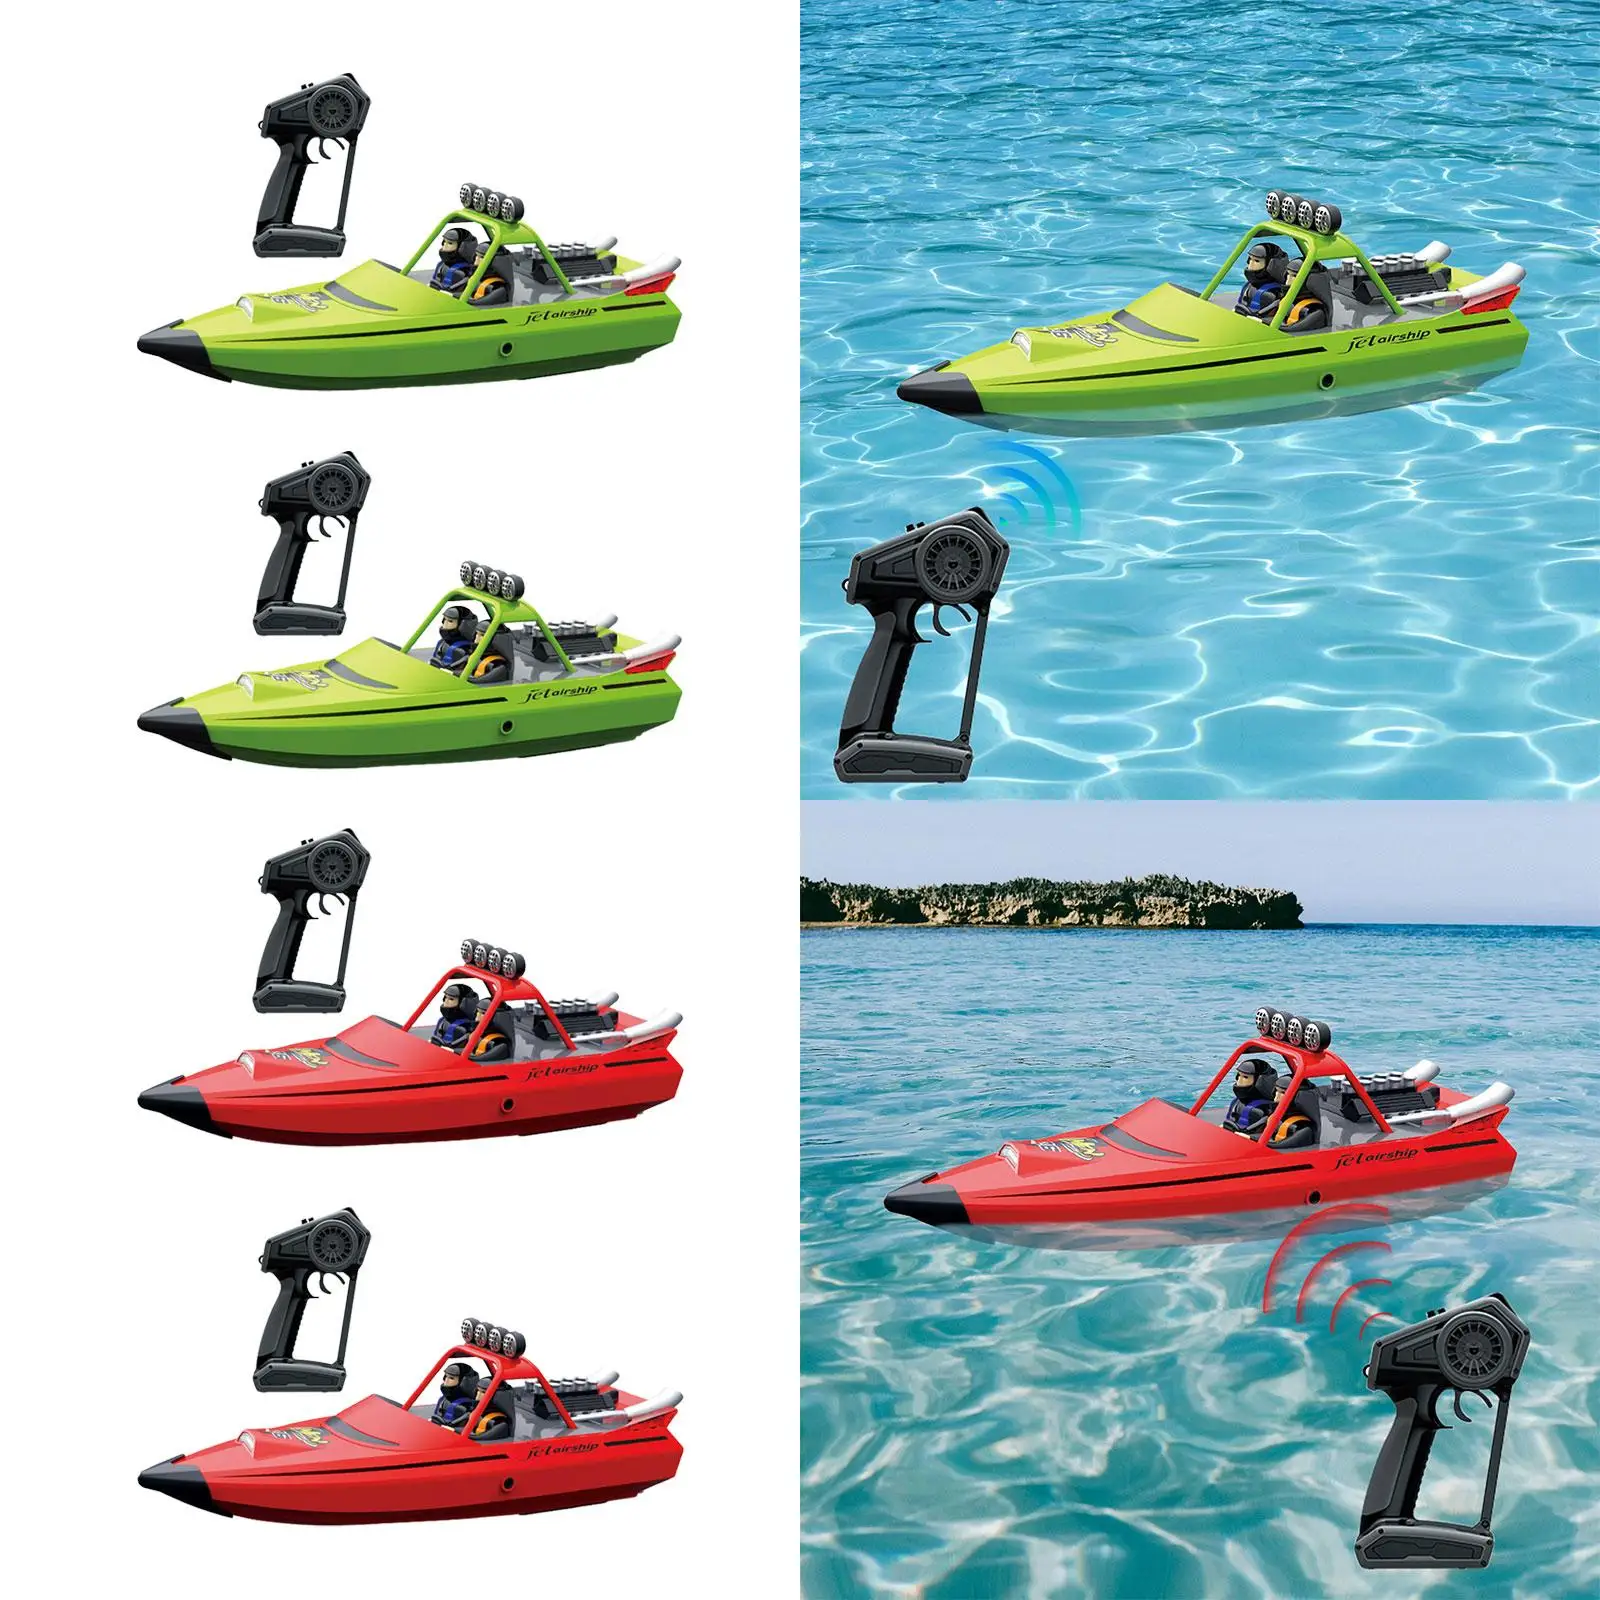 RC Boat Summer Outdoor Water Toy Remote Control Boat 30km/H High Speed for Kids Teens Adults River Water Play Holiday Gifts